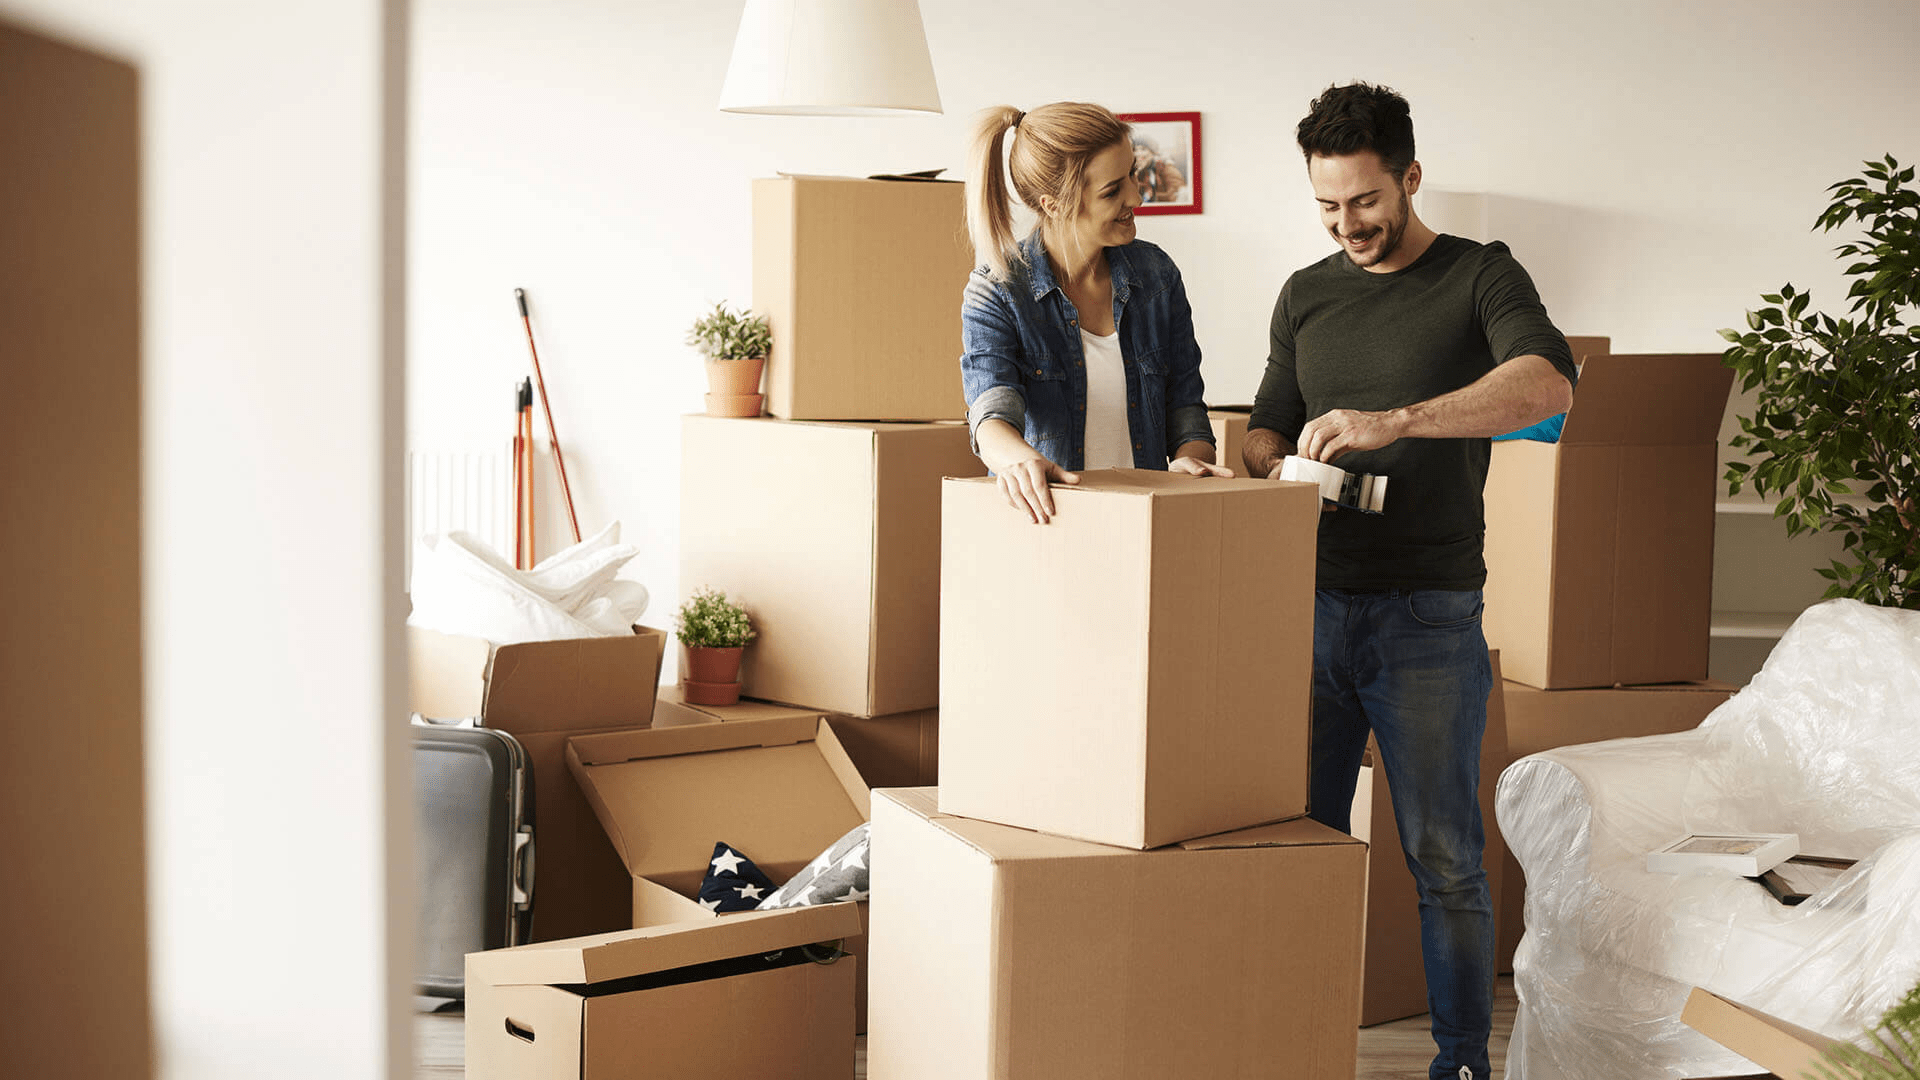 Choosing the right van for your move